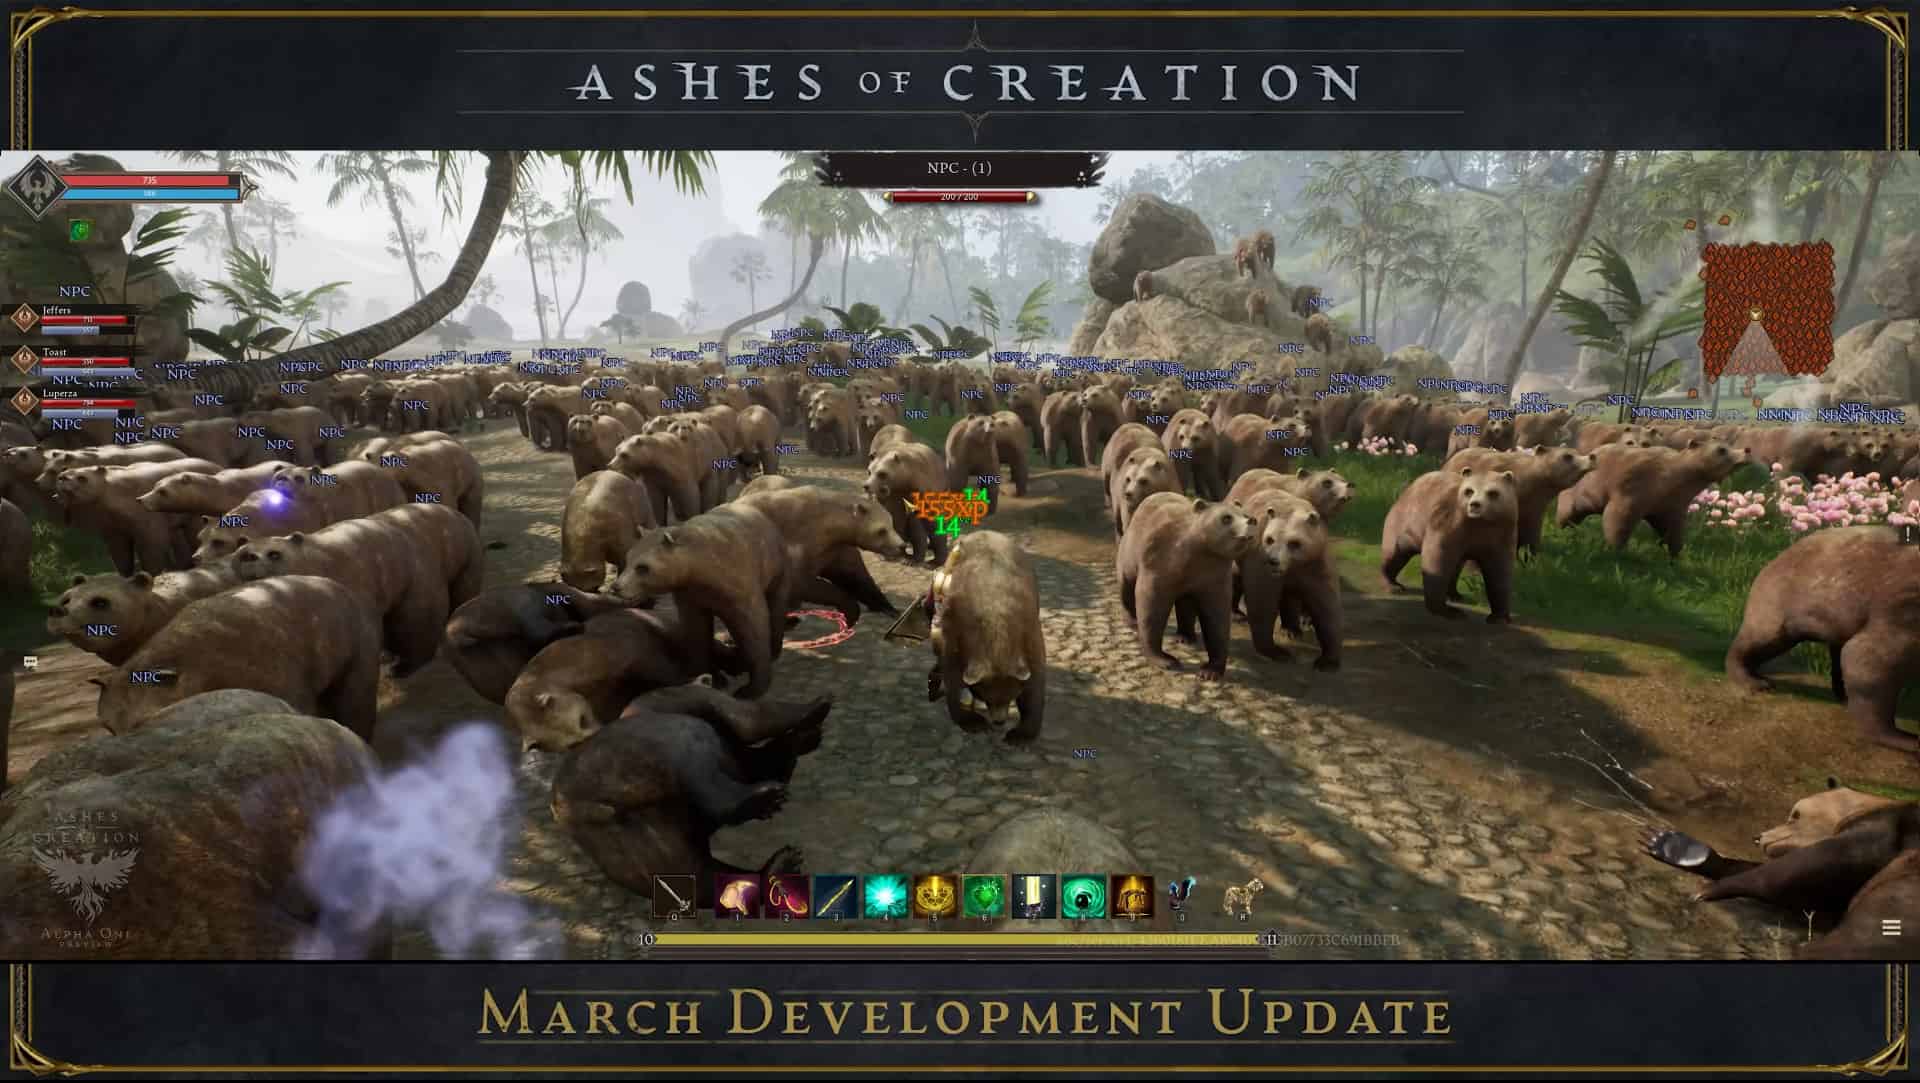 Ashes of Creation Team Fights More Than 1000 Bears In March Update